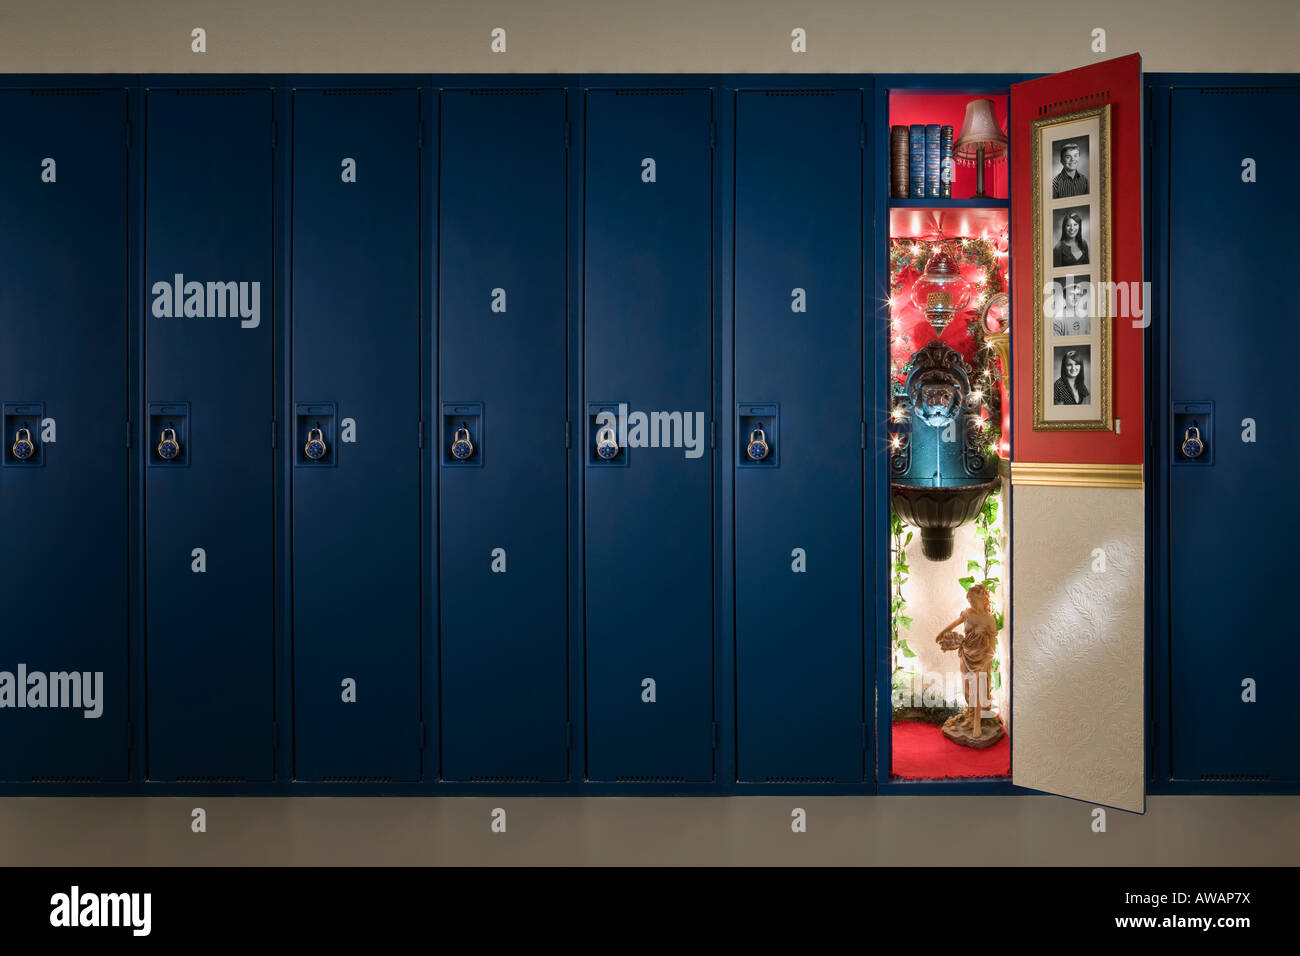 A row of lockers with one open Stock Photo